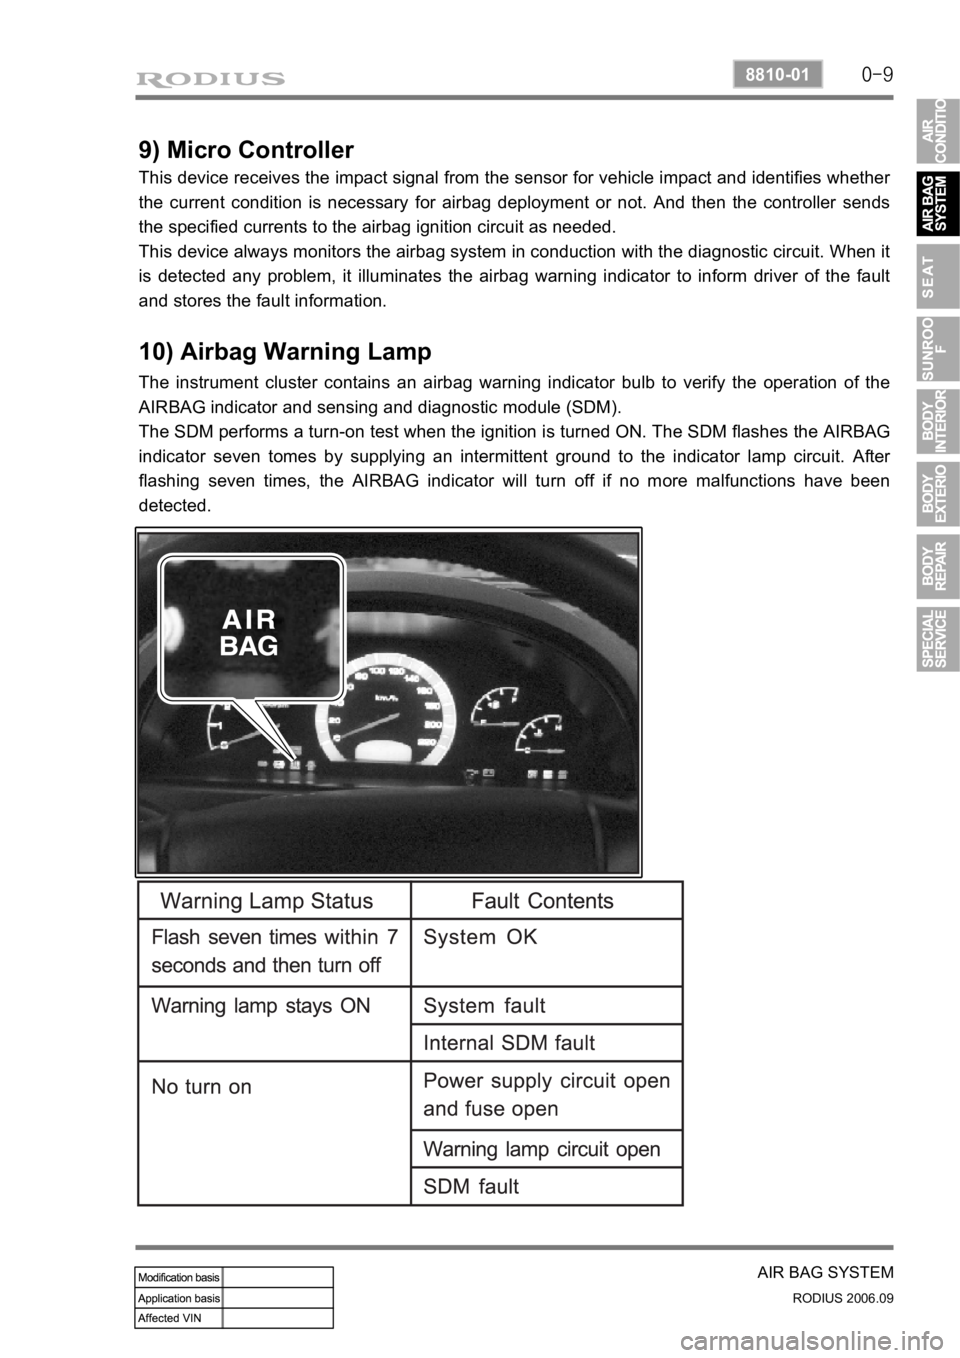 SSANGYONG RODIUS 2007  Service Manual 0-9
AIR BAG SYSTEM
RODIUS 2006.09
8810-01
9) Micro Controller
This device receives the impact signal from the sensor for vehicle impact and identifies whether 
the current condition is necessary for a